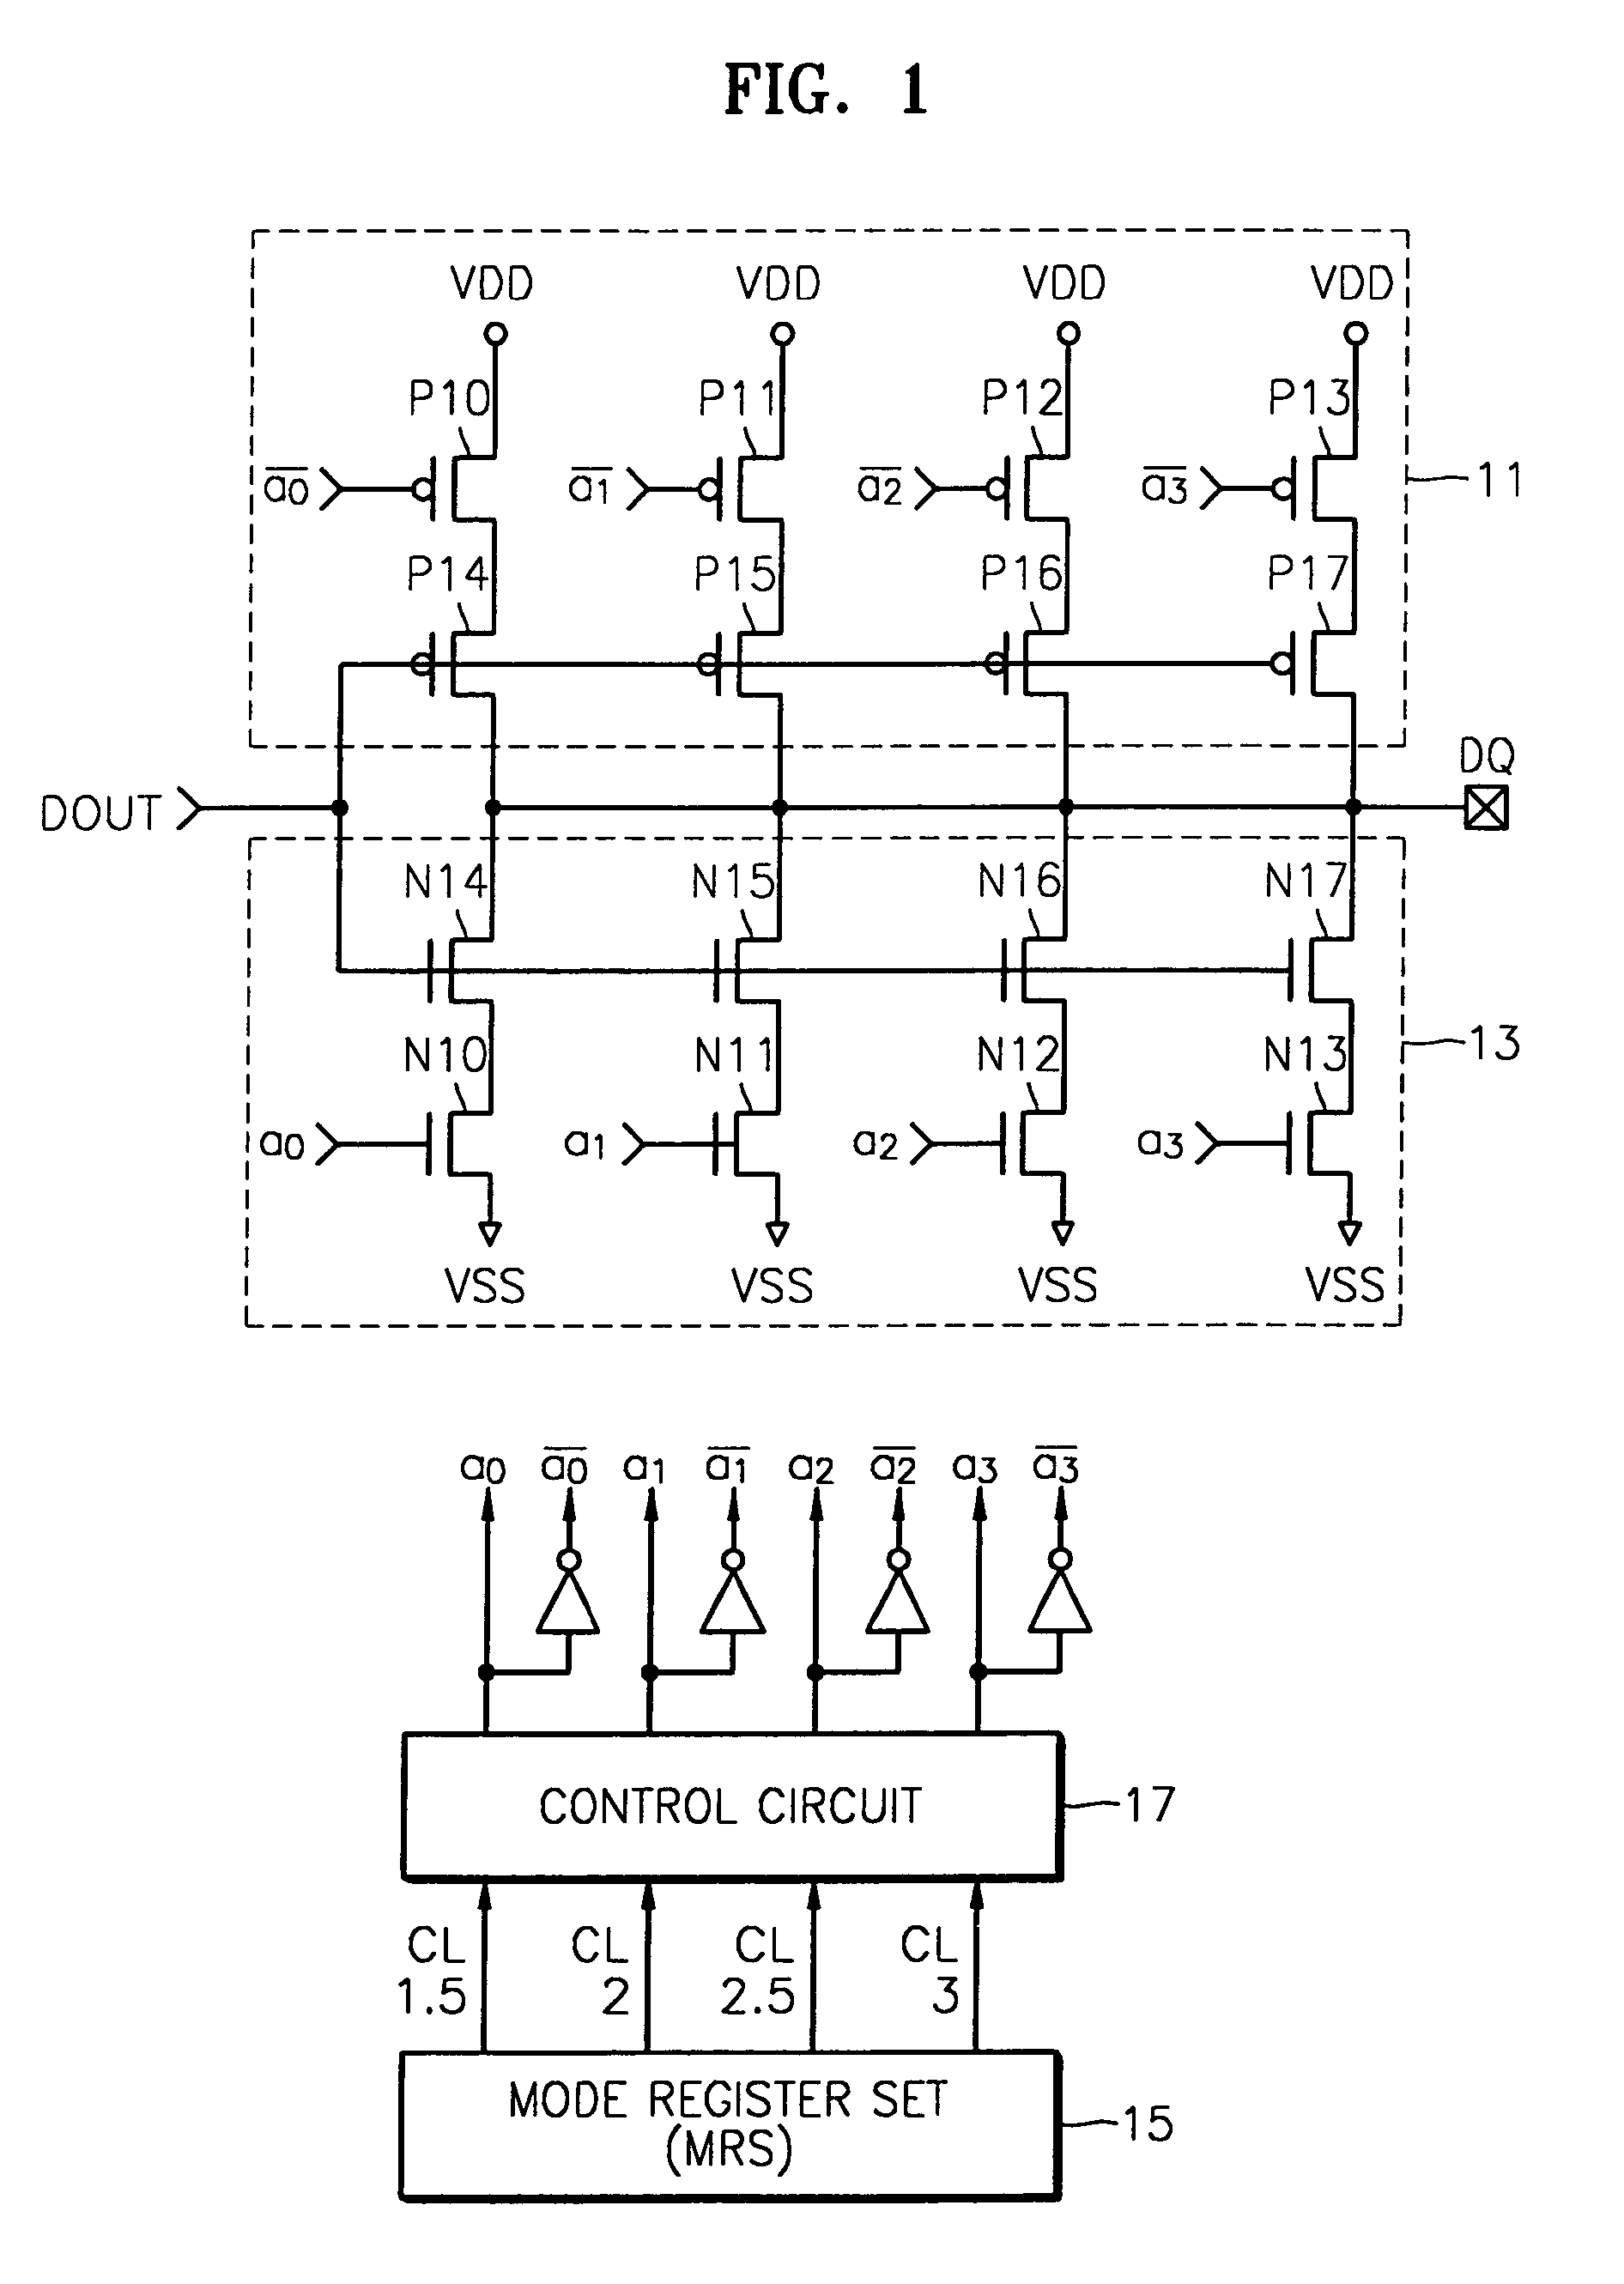 Output driver capable of controlling slew rate of output signal according to operating frequency information or CAS latency information